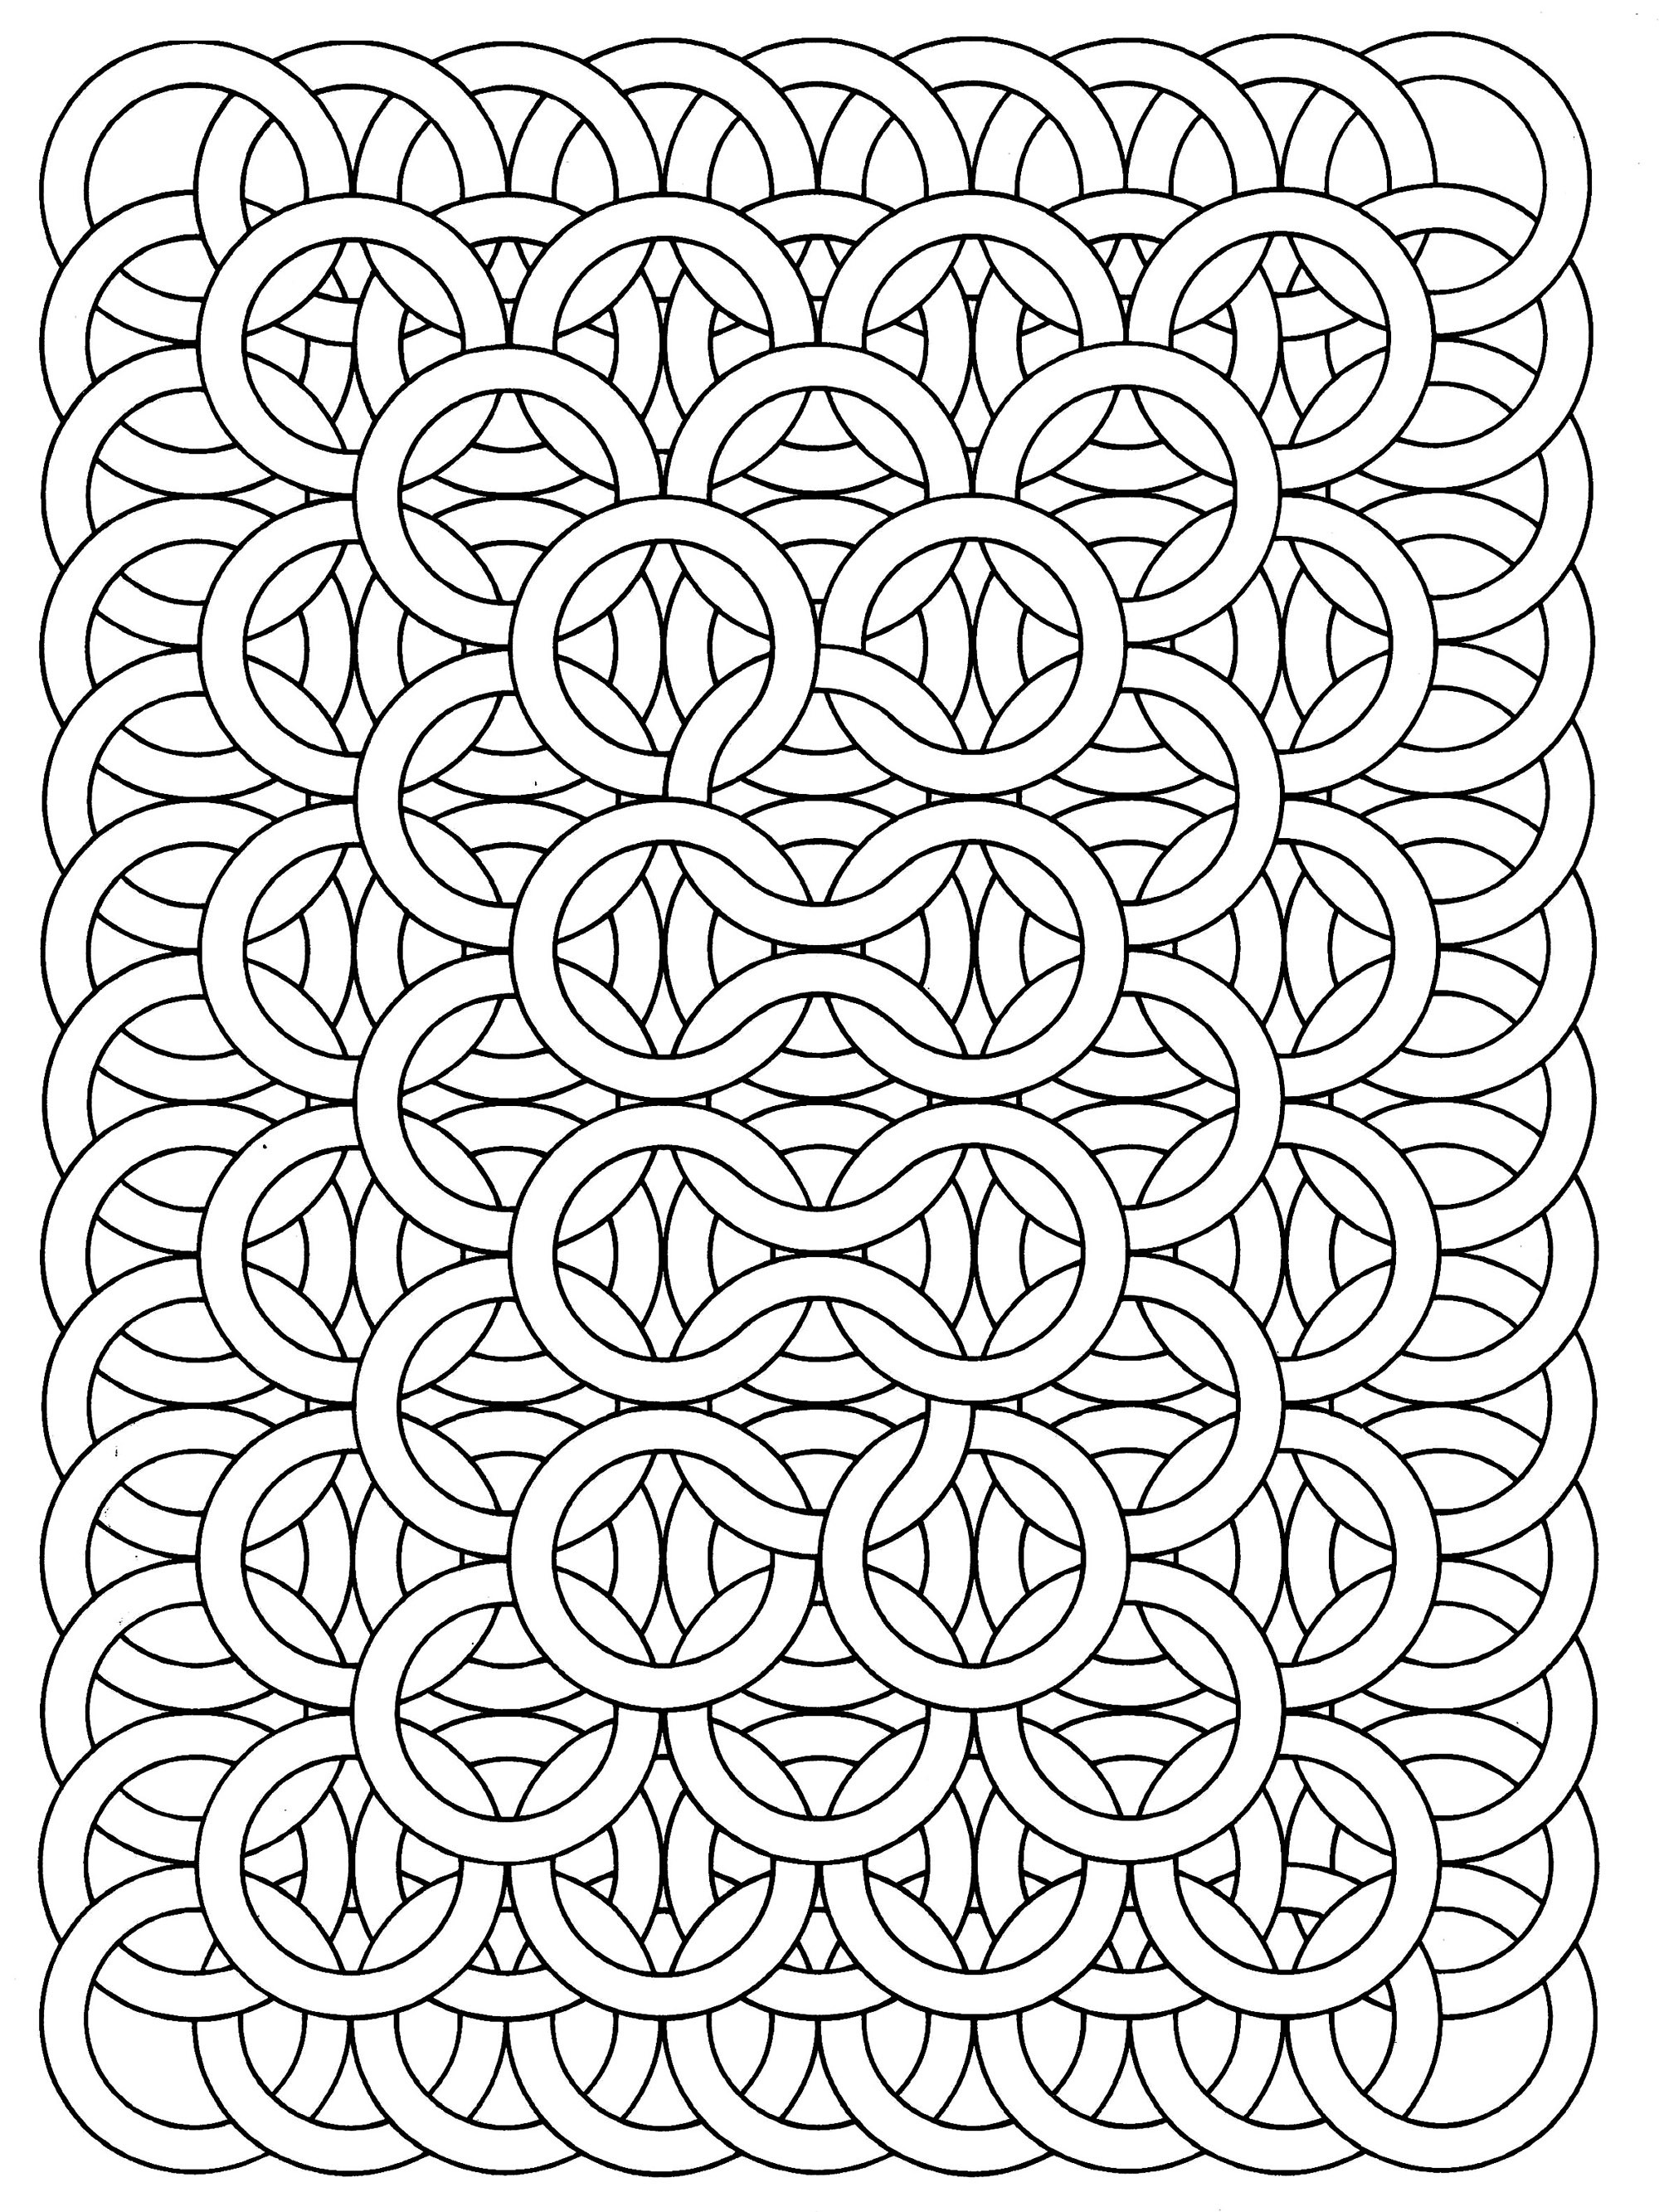 Coloring Pages For Adults Easy
 FREE Adult Coloring Pages Happiness is Homemade